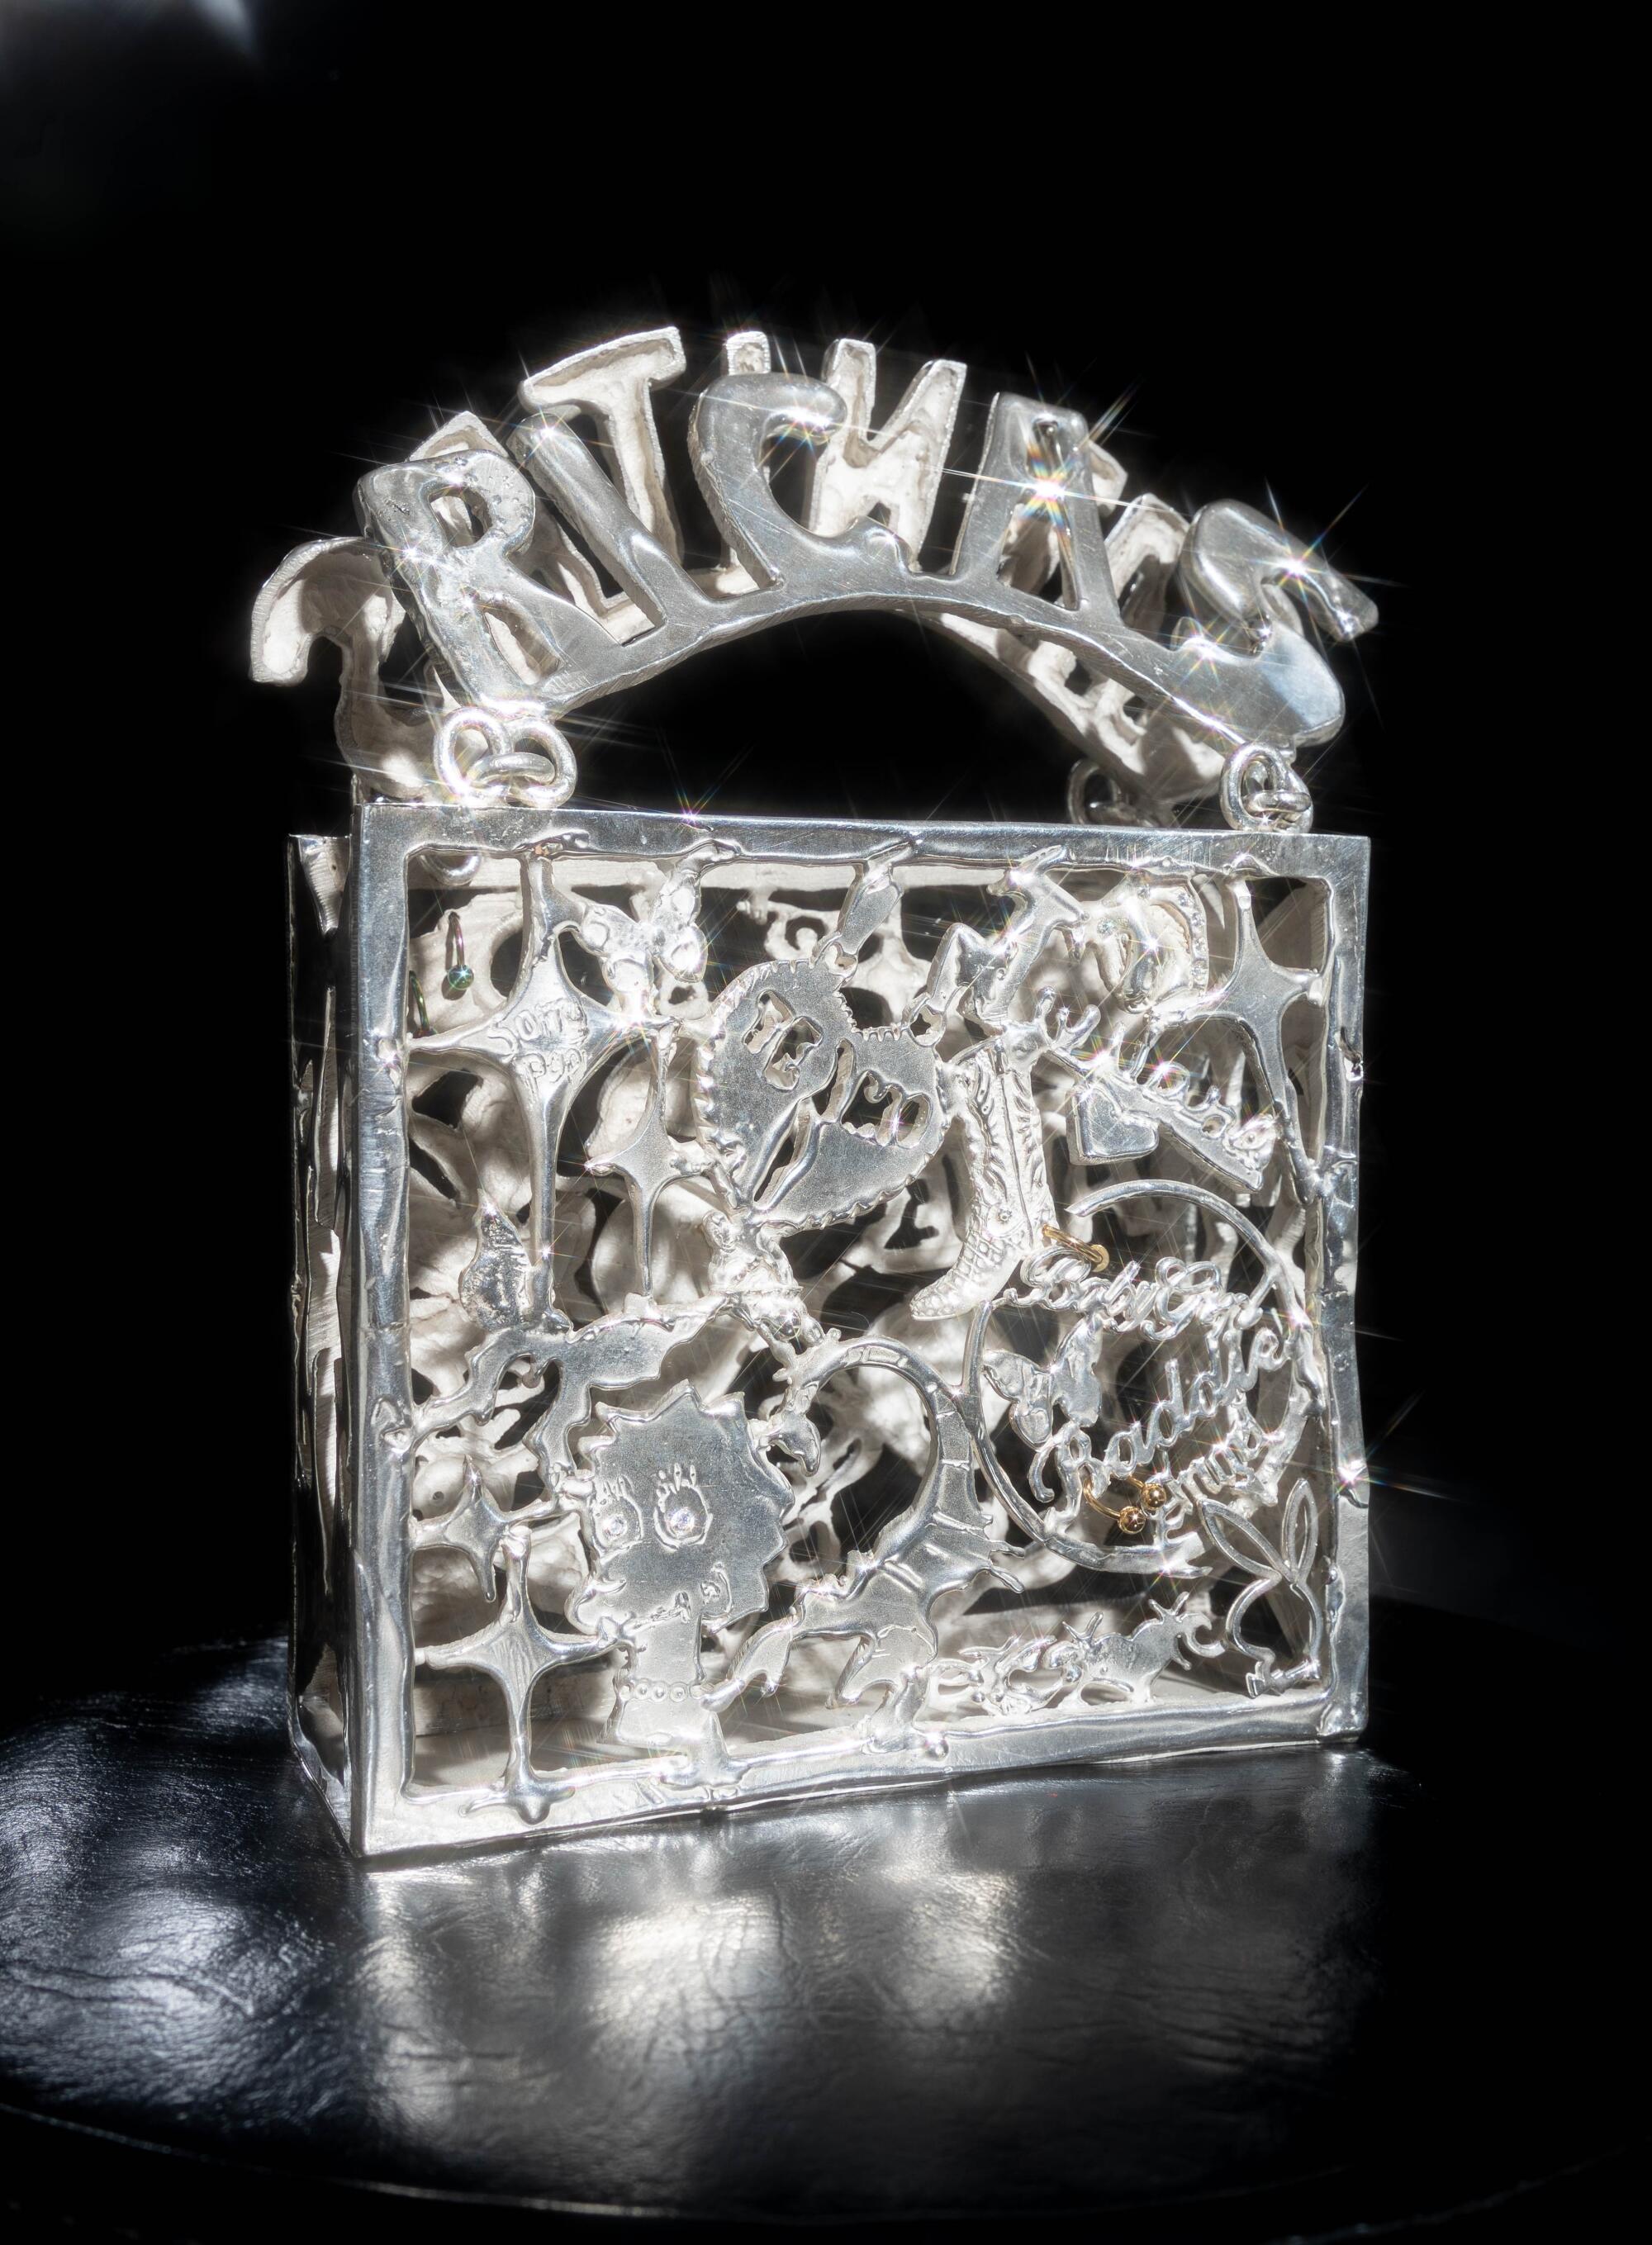 Photo of “KEPERRA” — a sterling silver casted purse made by Georgina Trevio for Image magazine.